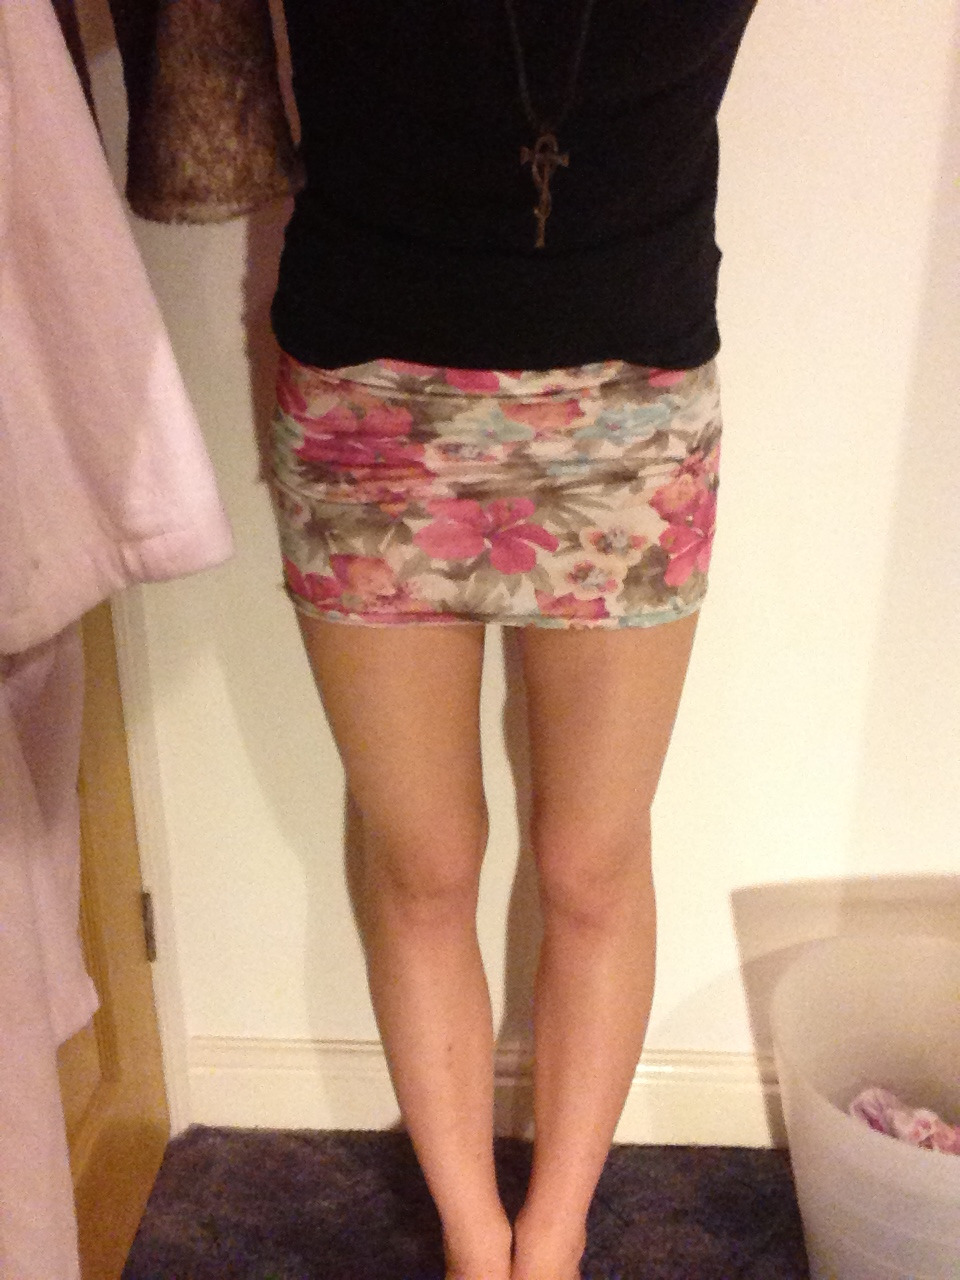 Found a skirt I haven&rsquo;t see in years :&rsquo;) it&rsquo;s tiny!